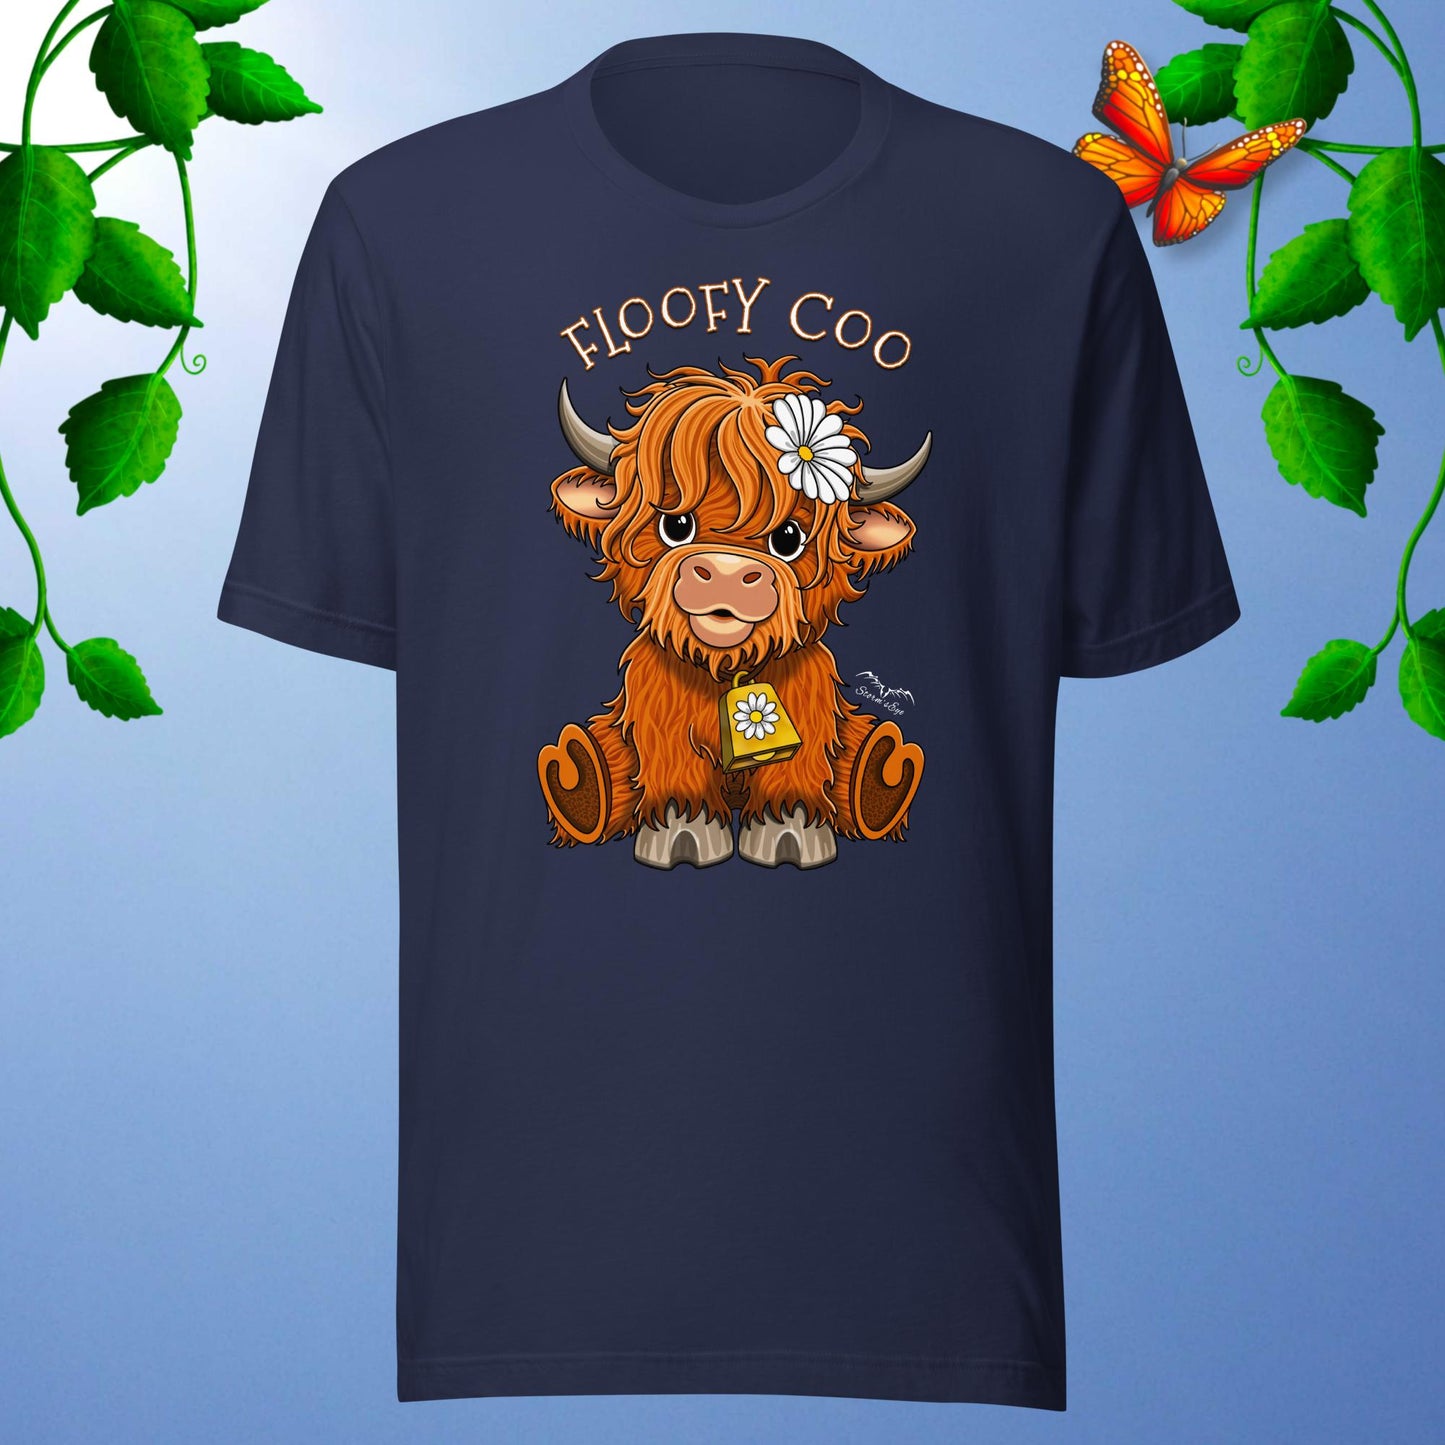 floofy coo highland cow T-shirt, navy blue by Stormseye Design